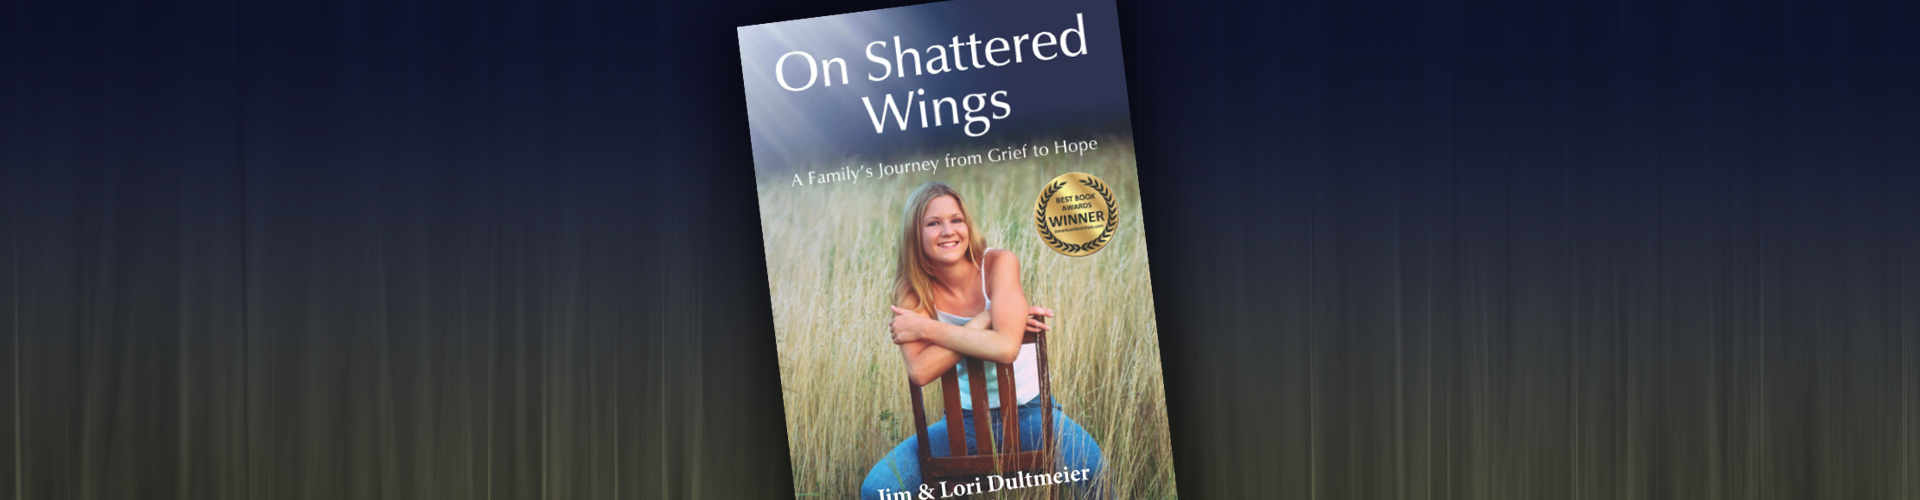 on shattered wings image